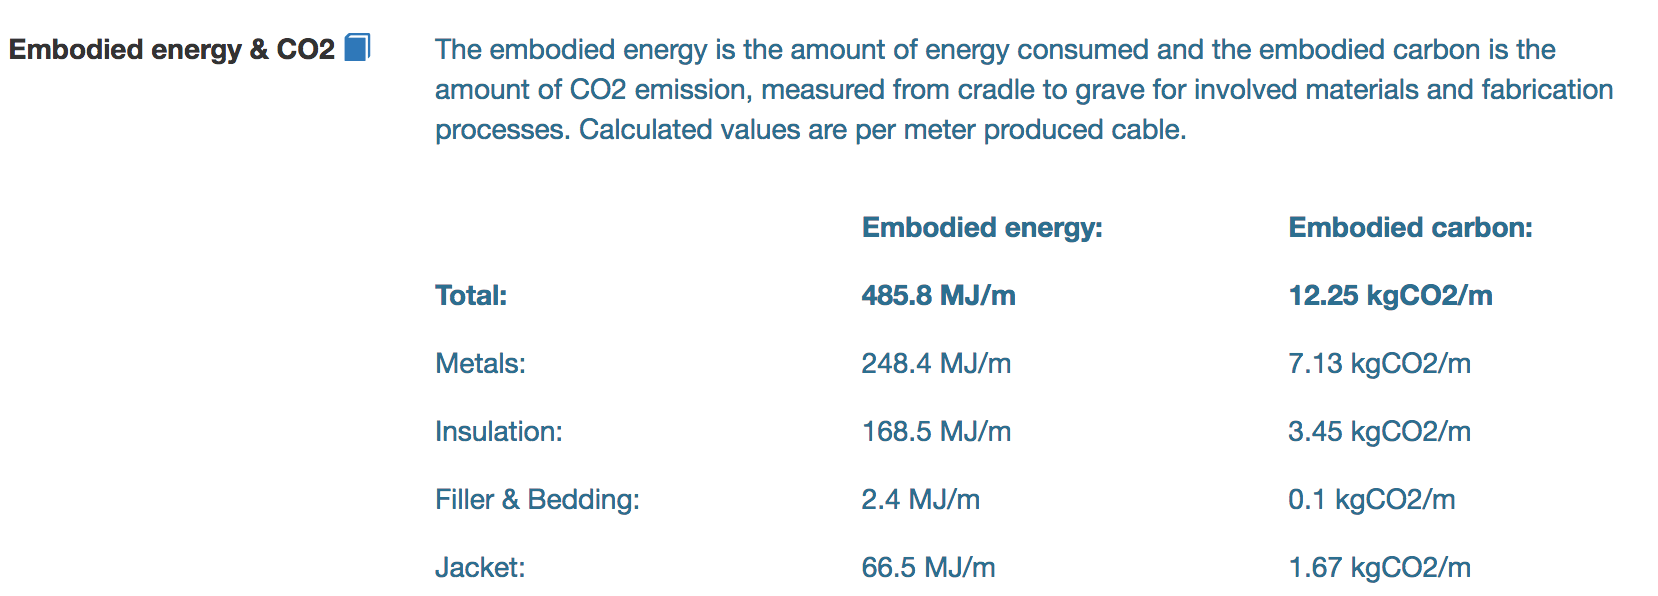 energy and carbon of aluminium cable